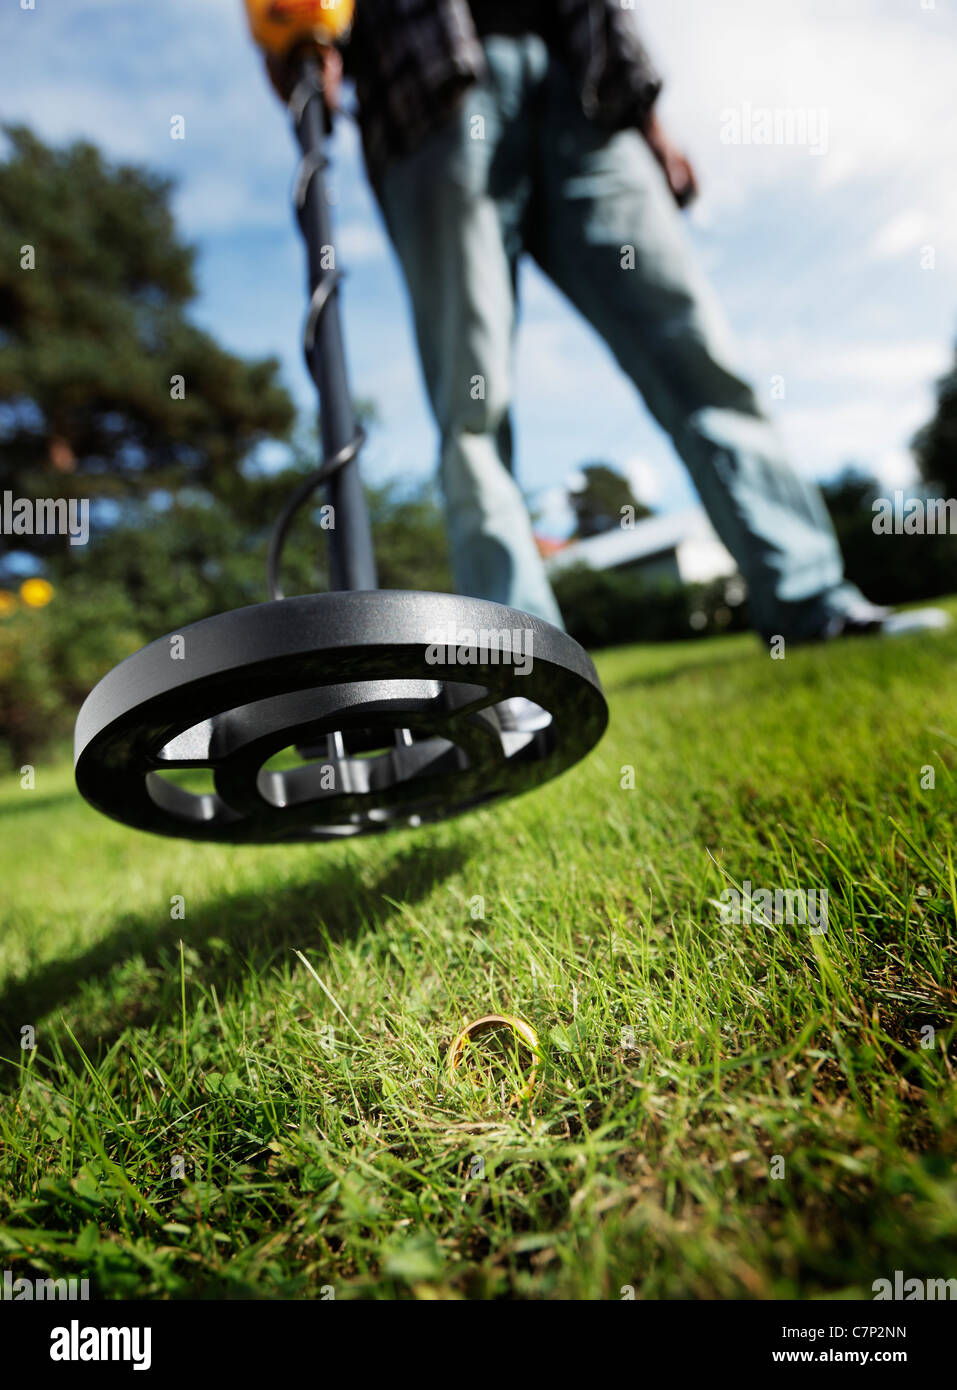 Man finding a gold ring in grass using a metal detector. Stock Photo